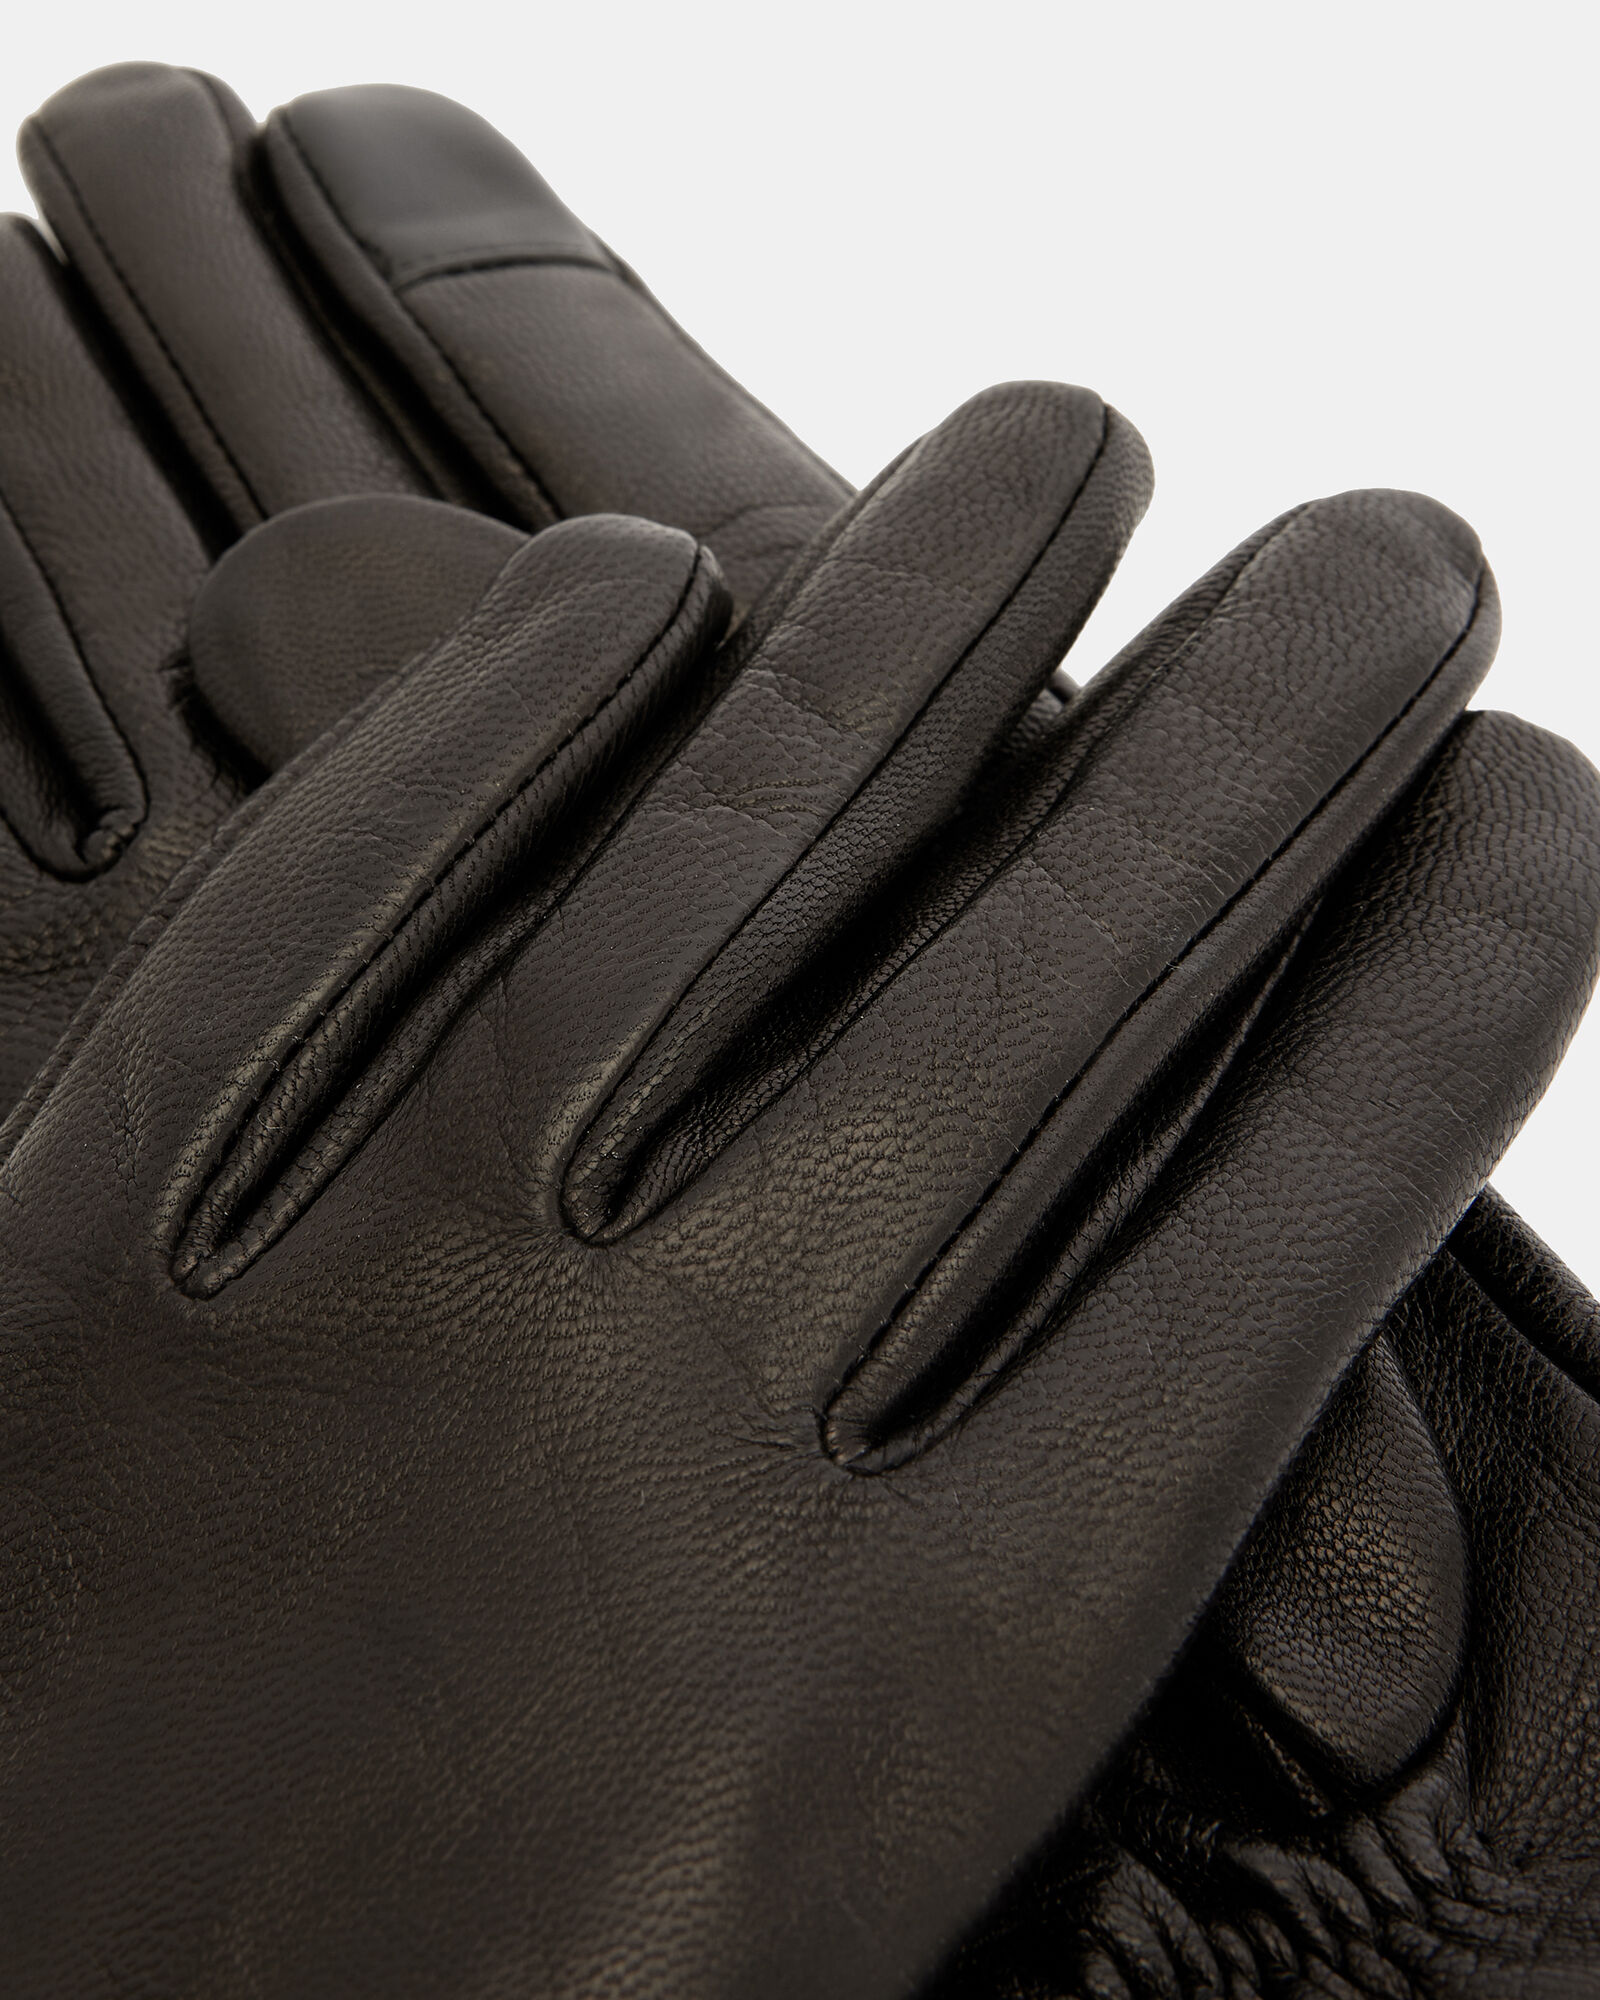 Roxy Leather Double Buckle Gloves BLACK/DULL NICKEL | ALLSAINTS US